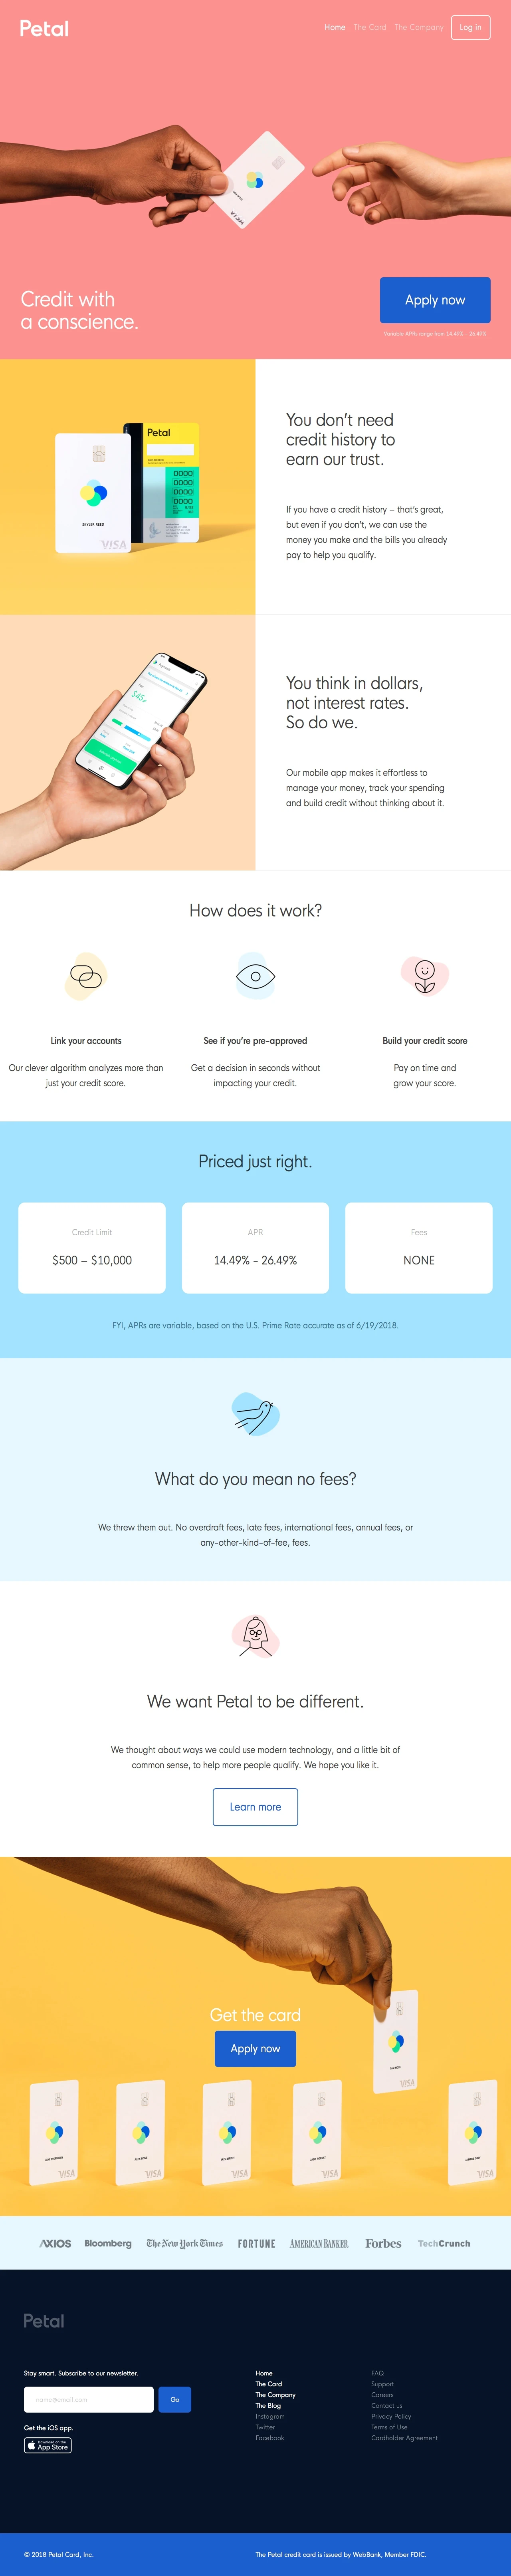 Petal Landing Page Example: A high limit, low interest rate, no-fee Visa credit card designed to help you manage money and start building credit, even if you have no credit.